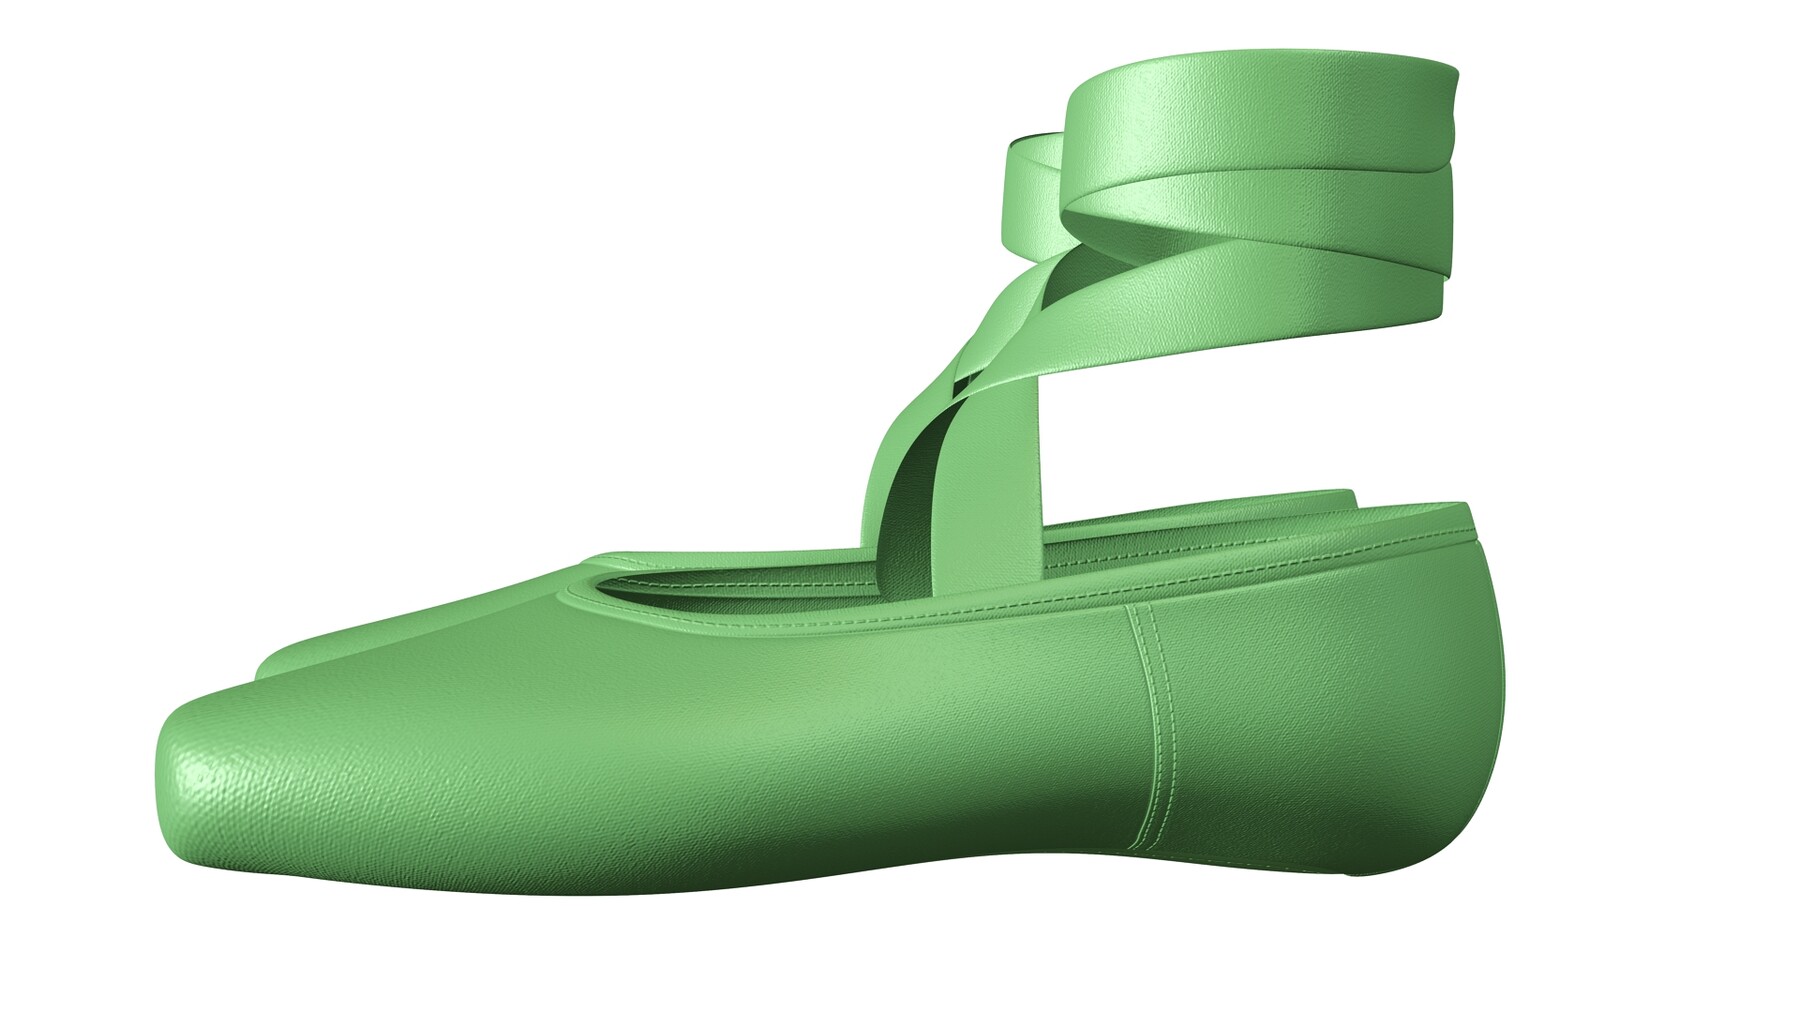 green pointe shoes